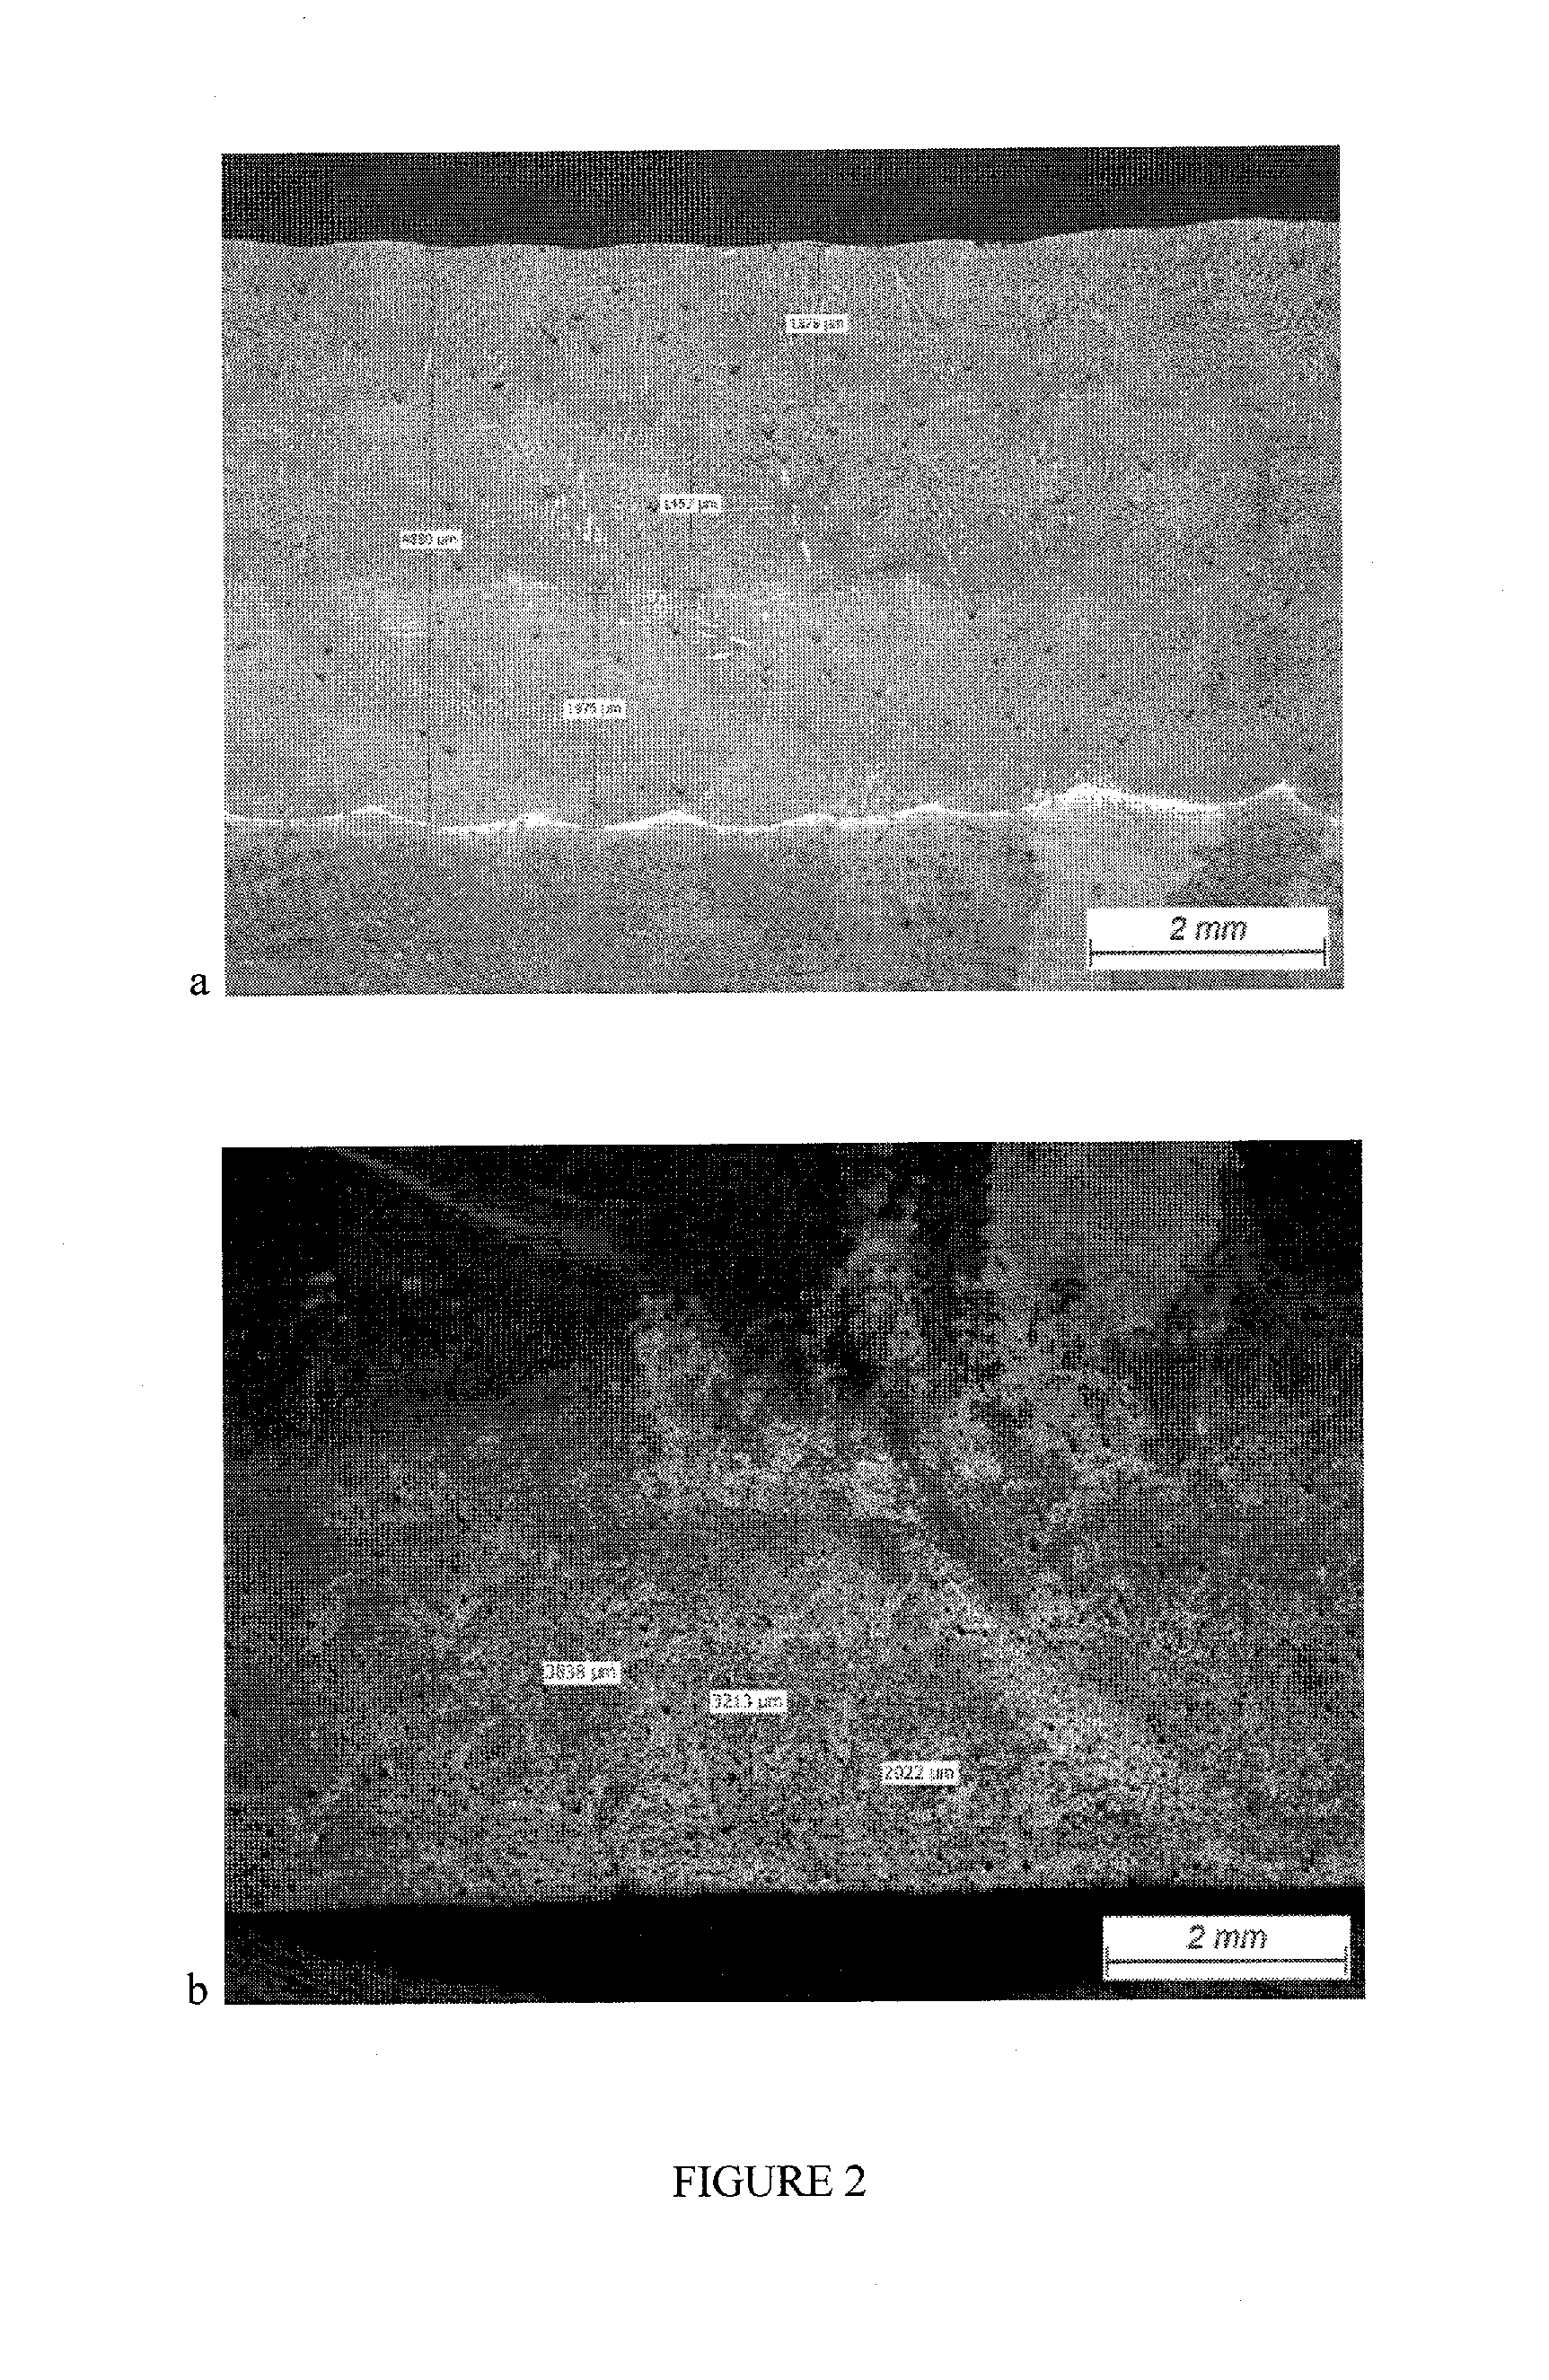 Method of cladding and fusion welding of superalloys